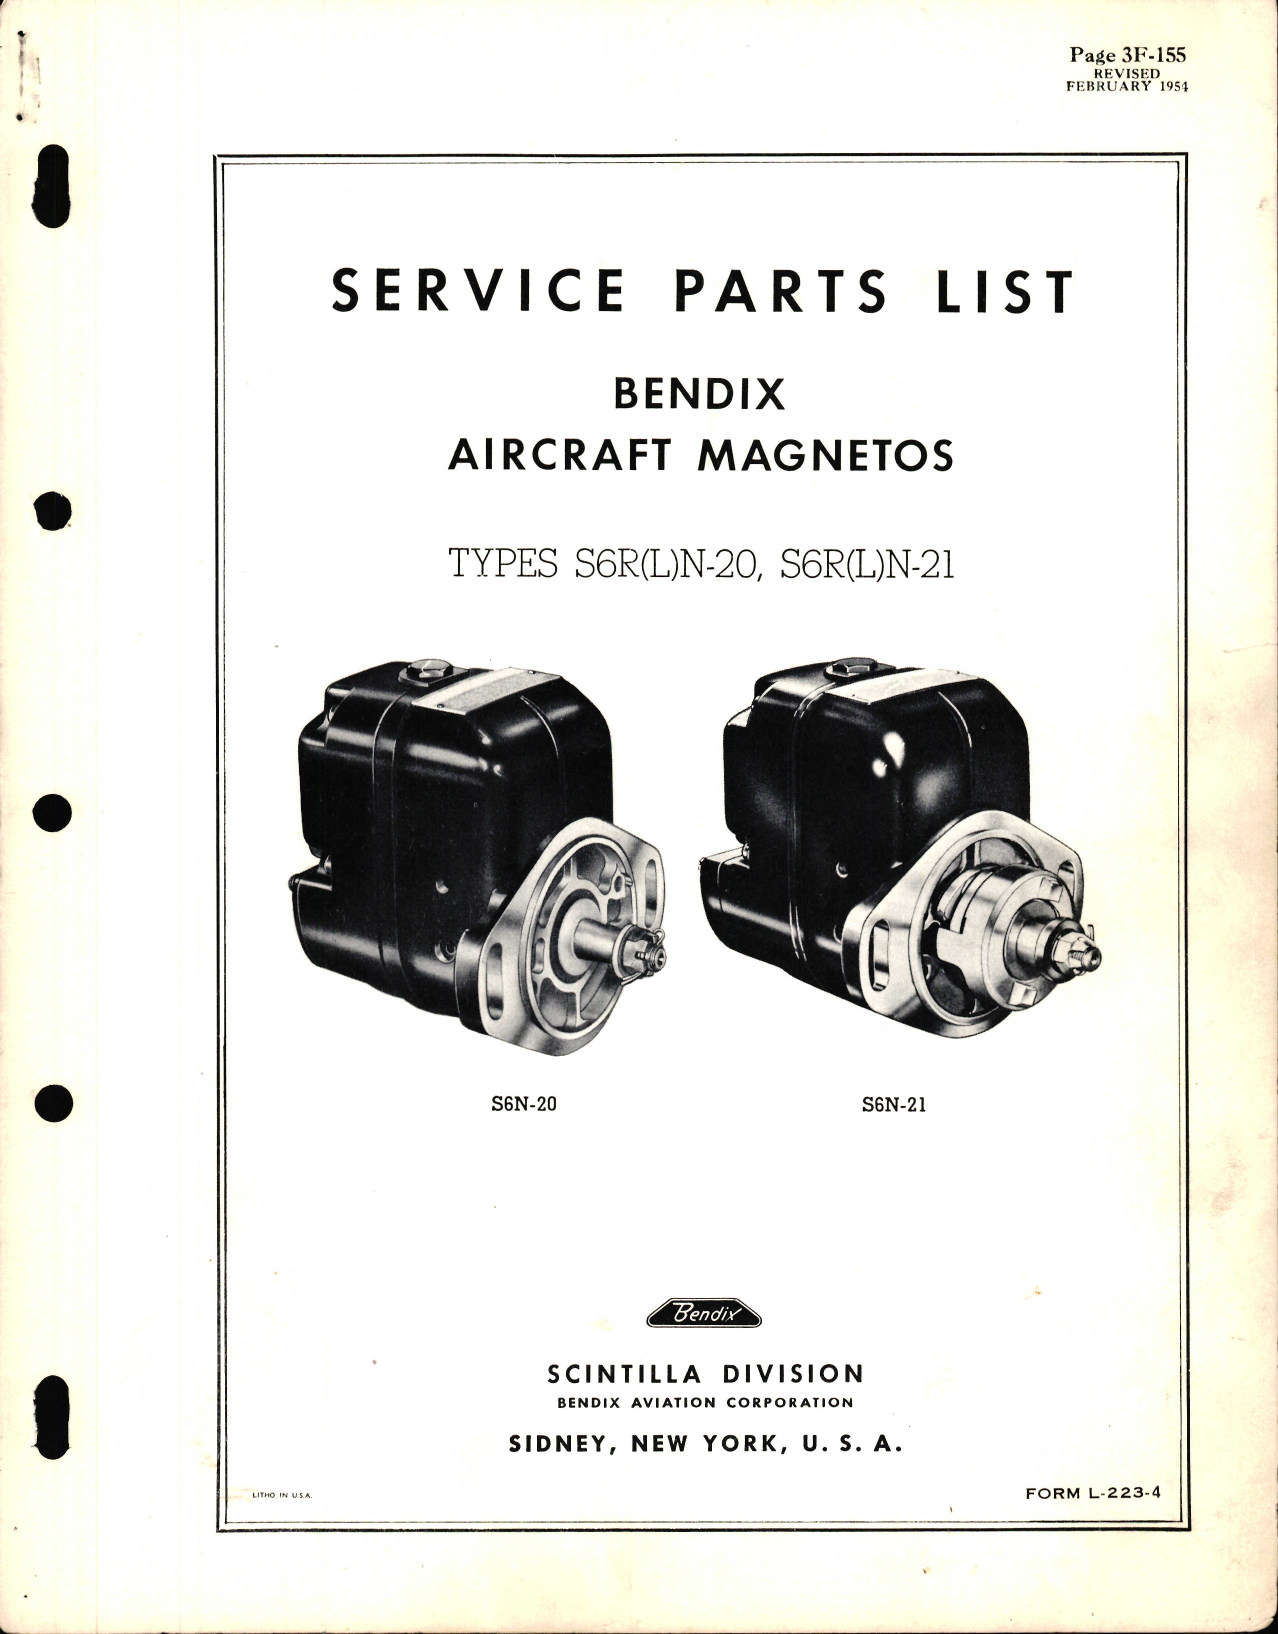 Sample page 1 from AirCorps Library document: Service Parts List for Bendix Aircraft Magnetos S6R(L)N-20 and S6R(L)N-21